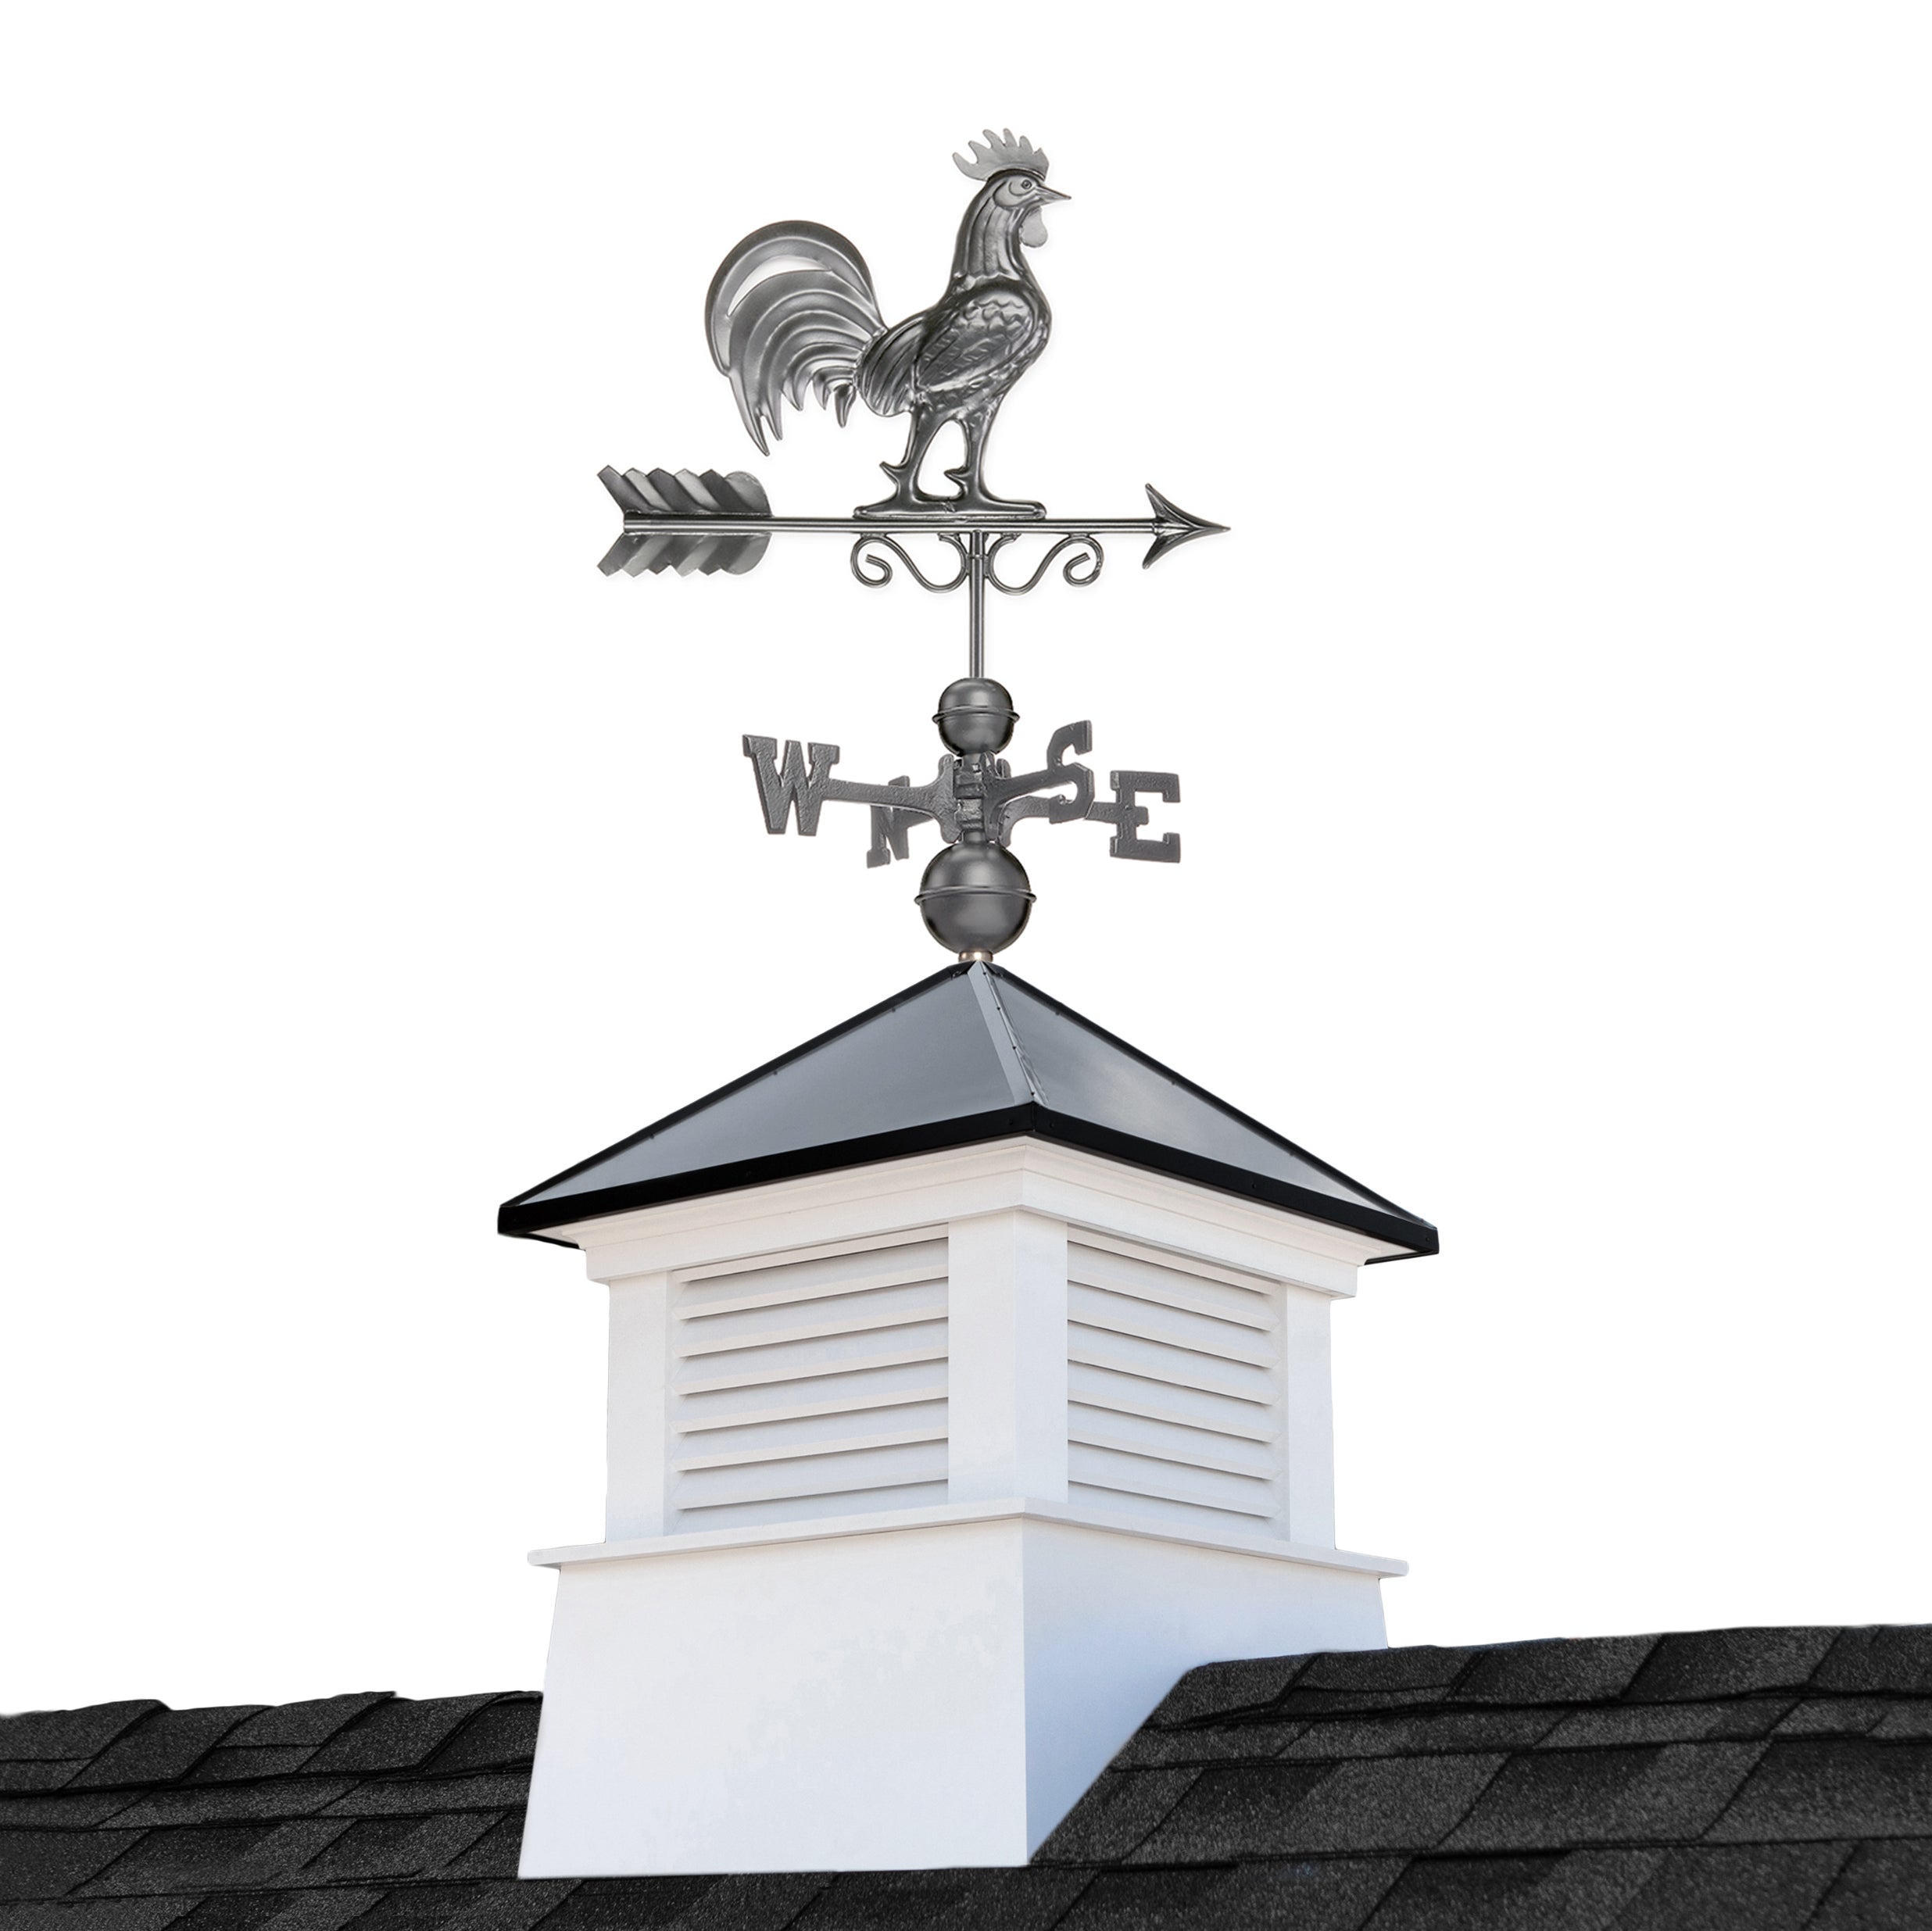 18" Square Manchester Vinyl Cupola with Black Aluminum roof and Dark Zinc Aluminum Rooster Weathervane